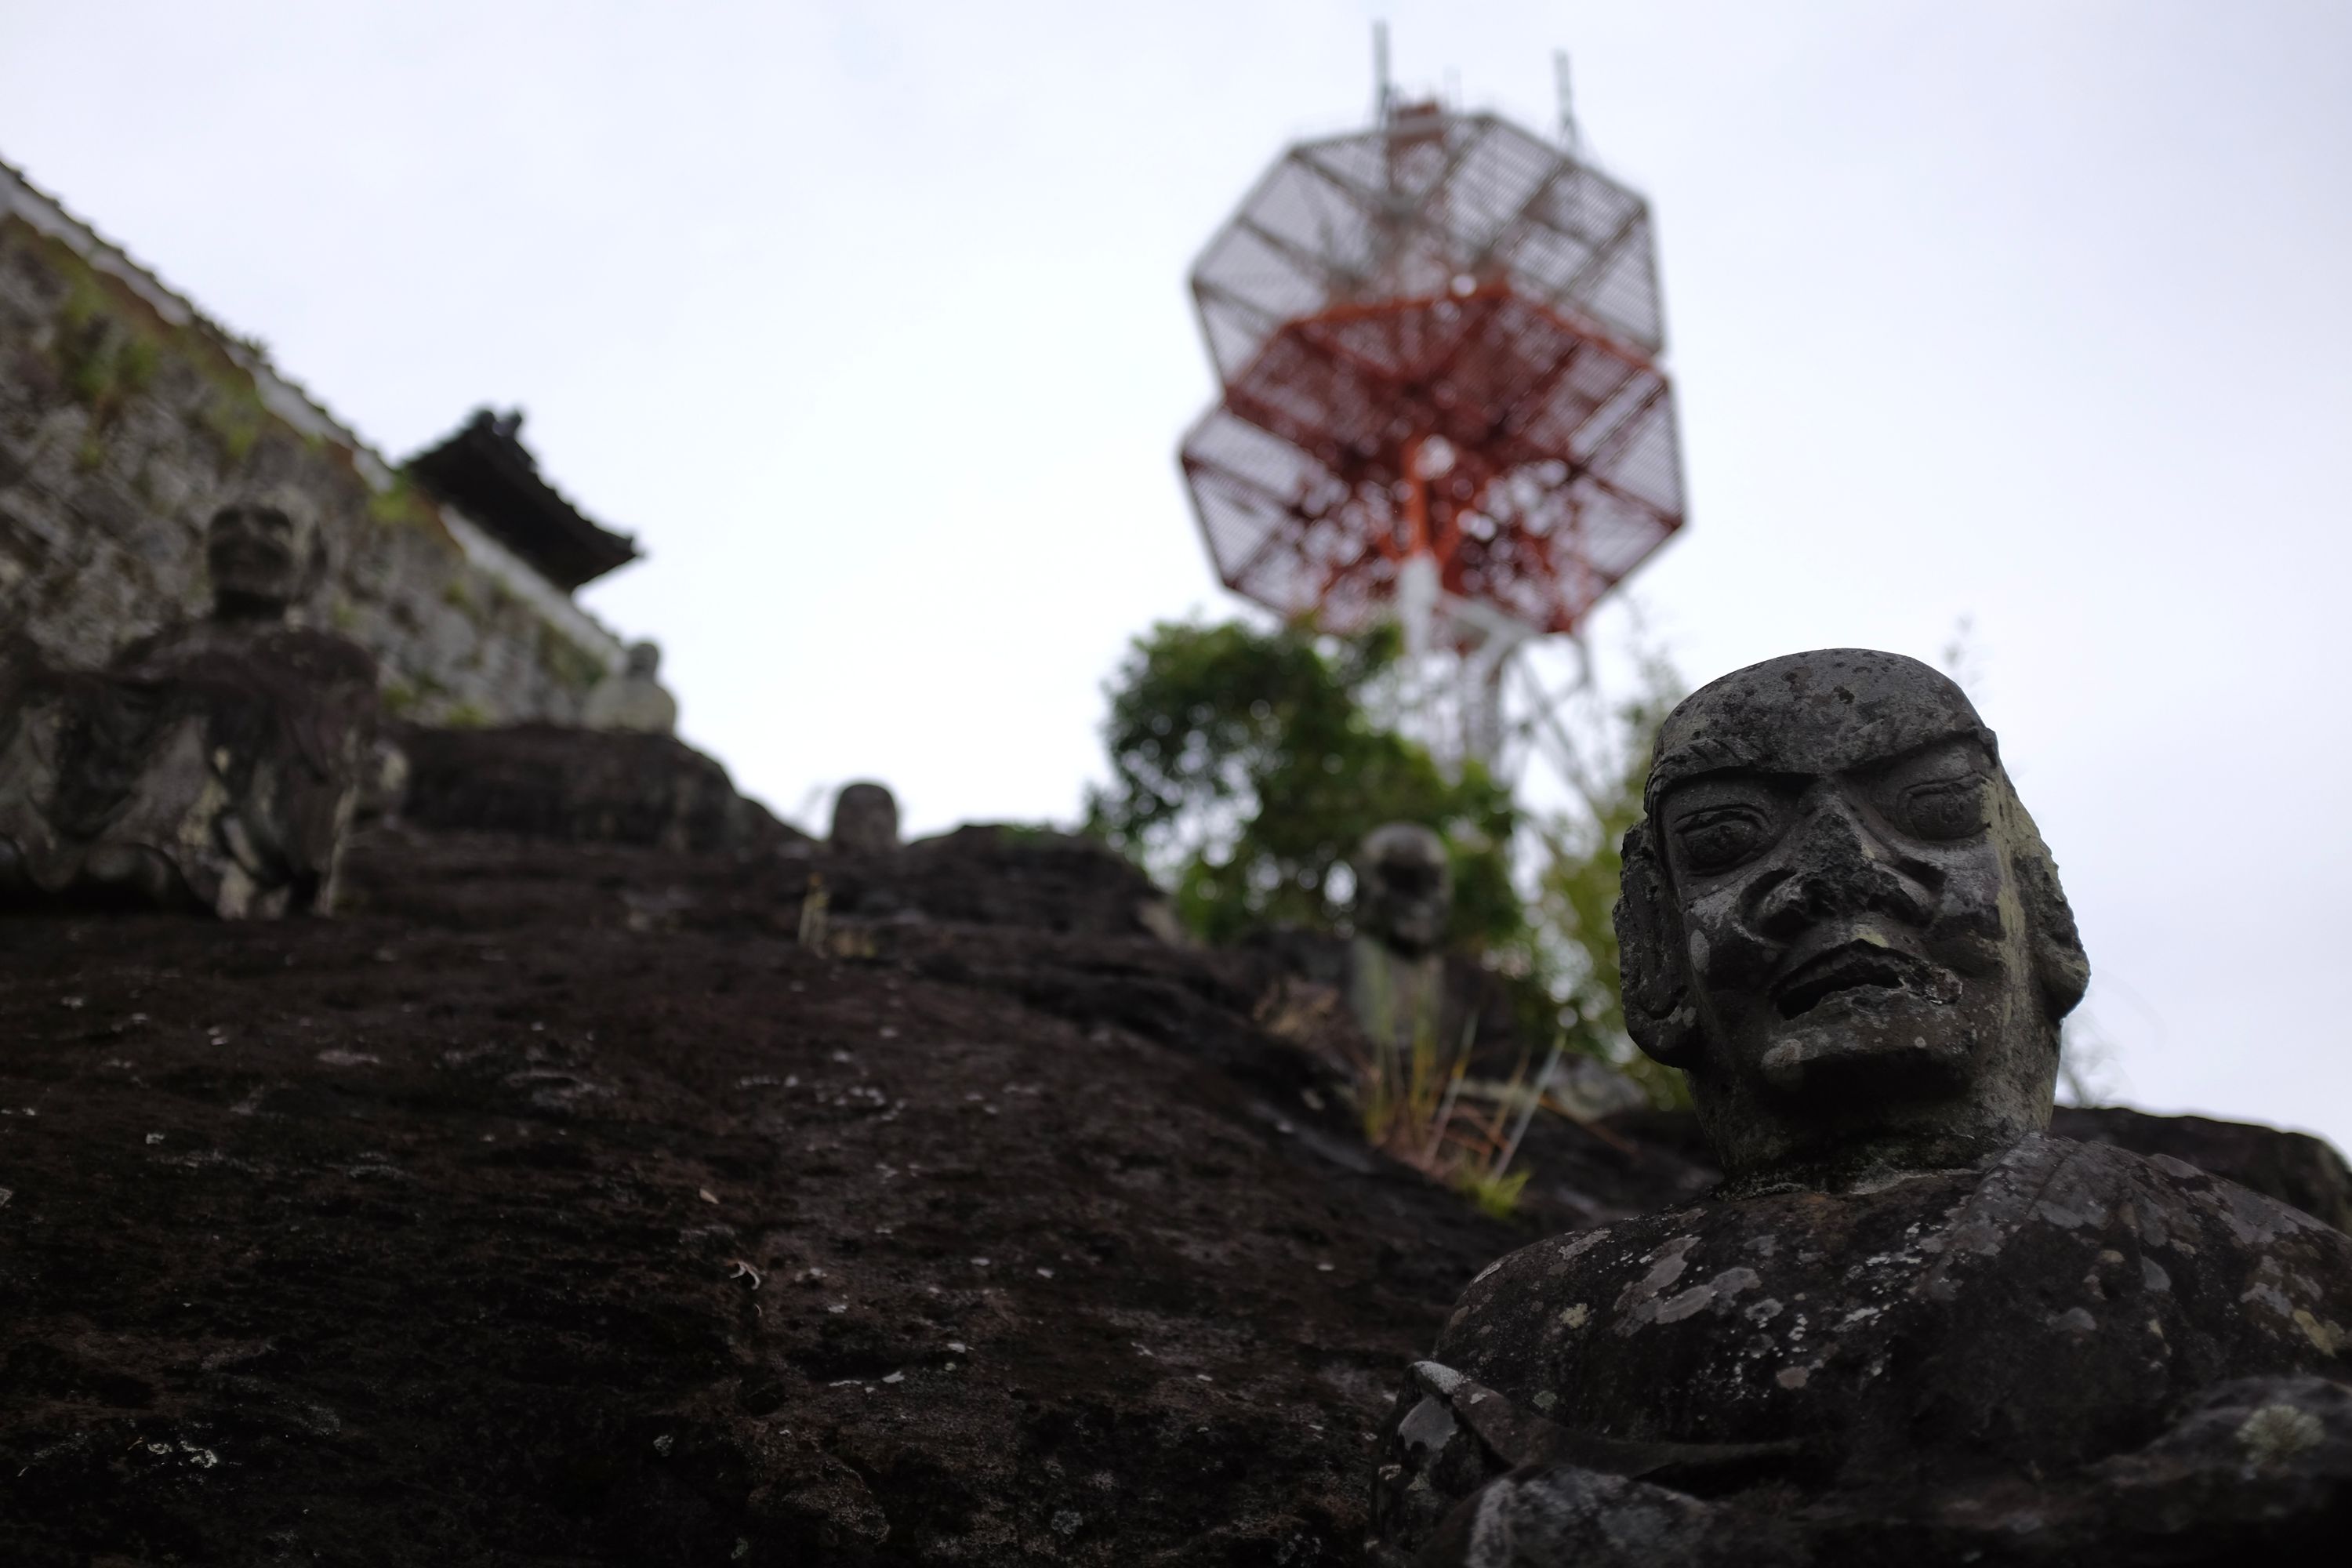 Statues of human heads carved from basalt on a hill, with two octogonal red antennas in the background.